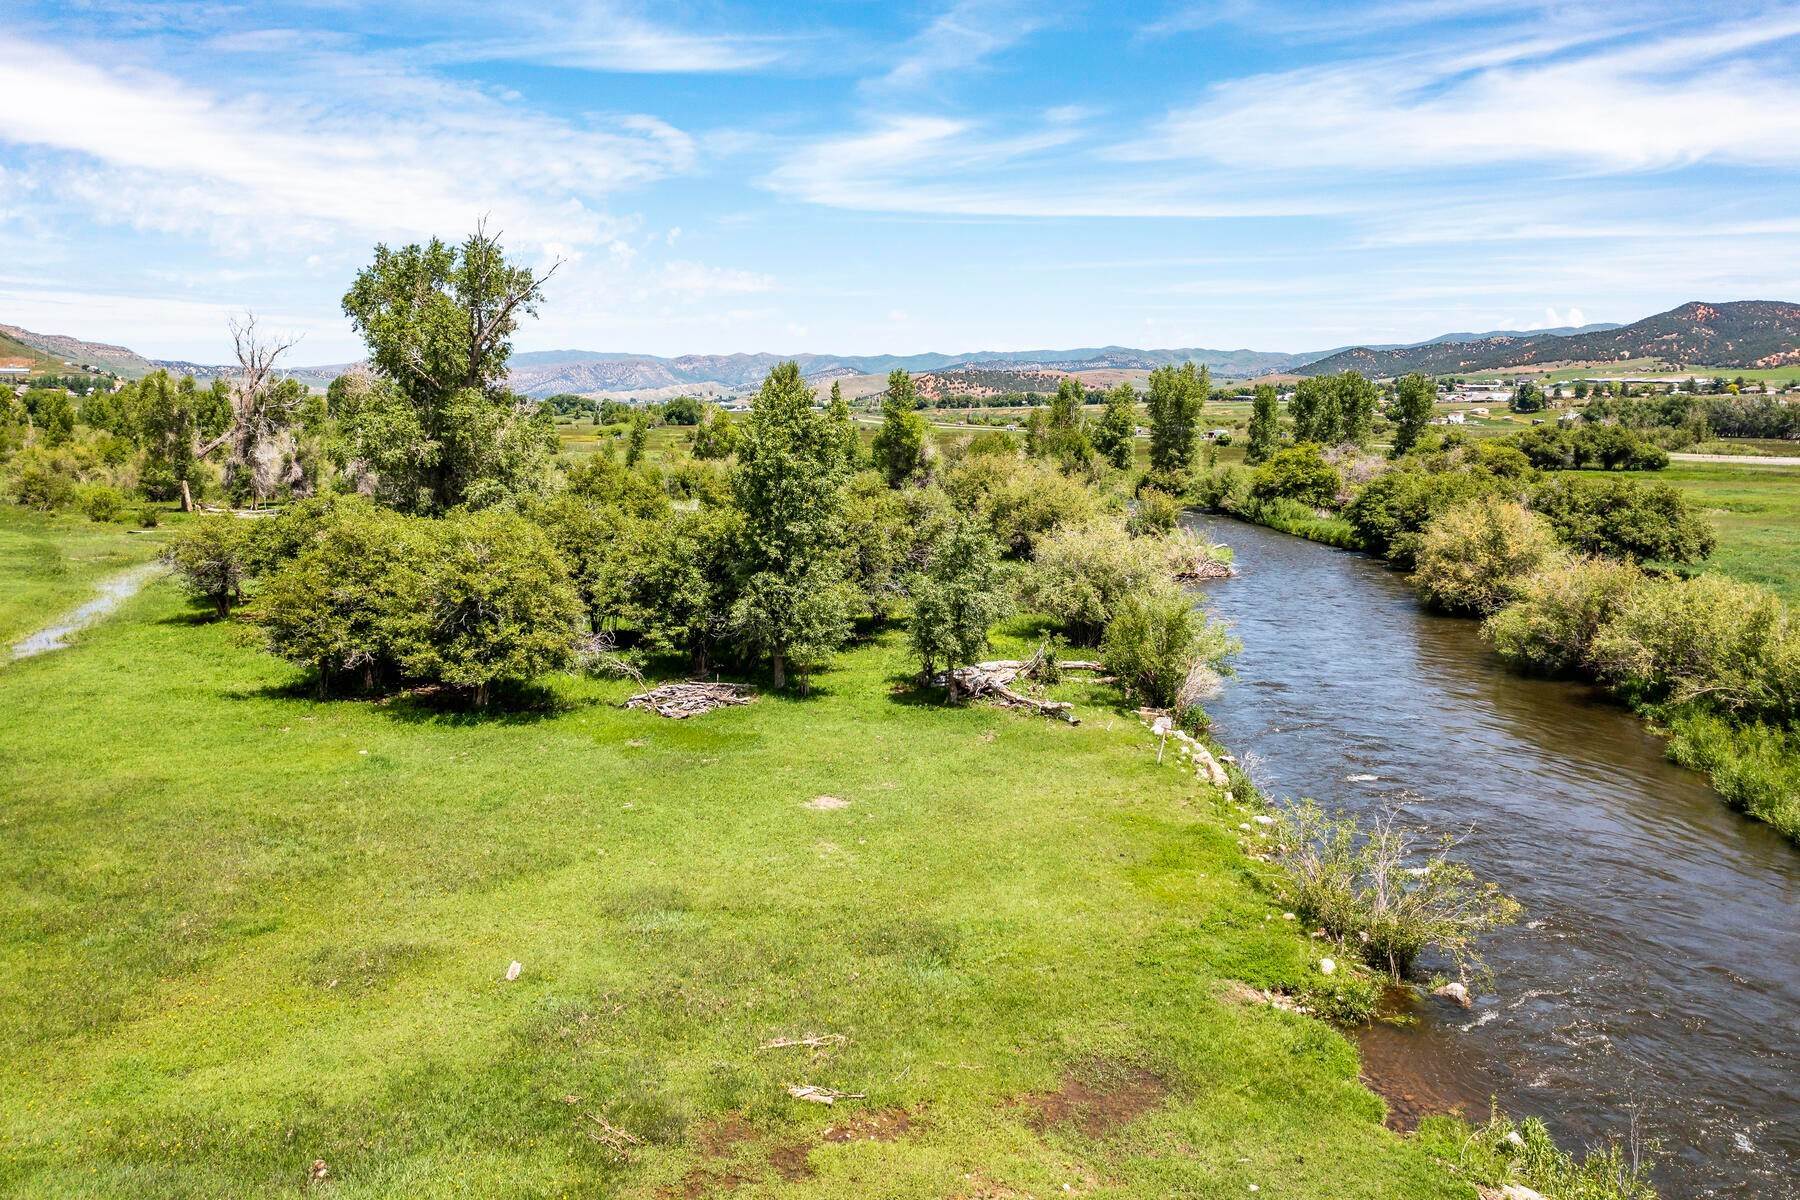 23. Farm and Ranch Properties for Sale at 261 Acres on the Weber River only 15 minutes from Park City 1255 S West Hoytsville Rd Hoytsville, Utah 84017 United States